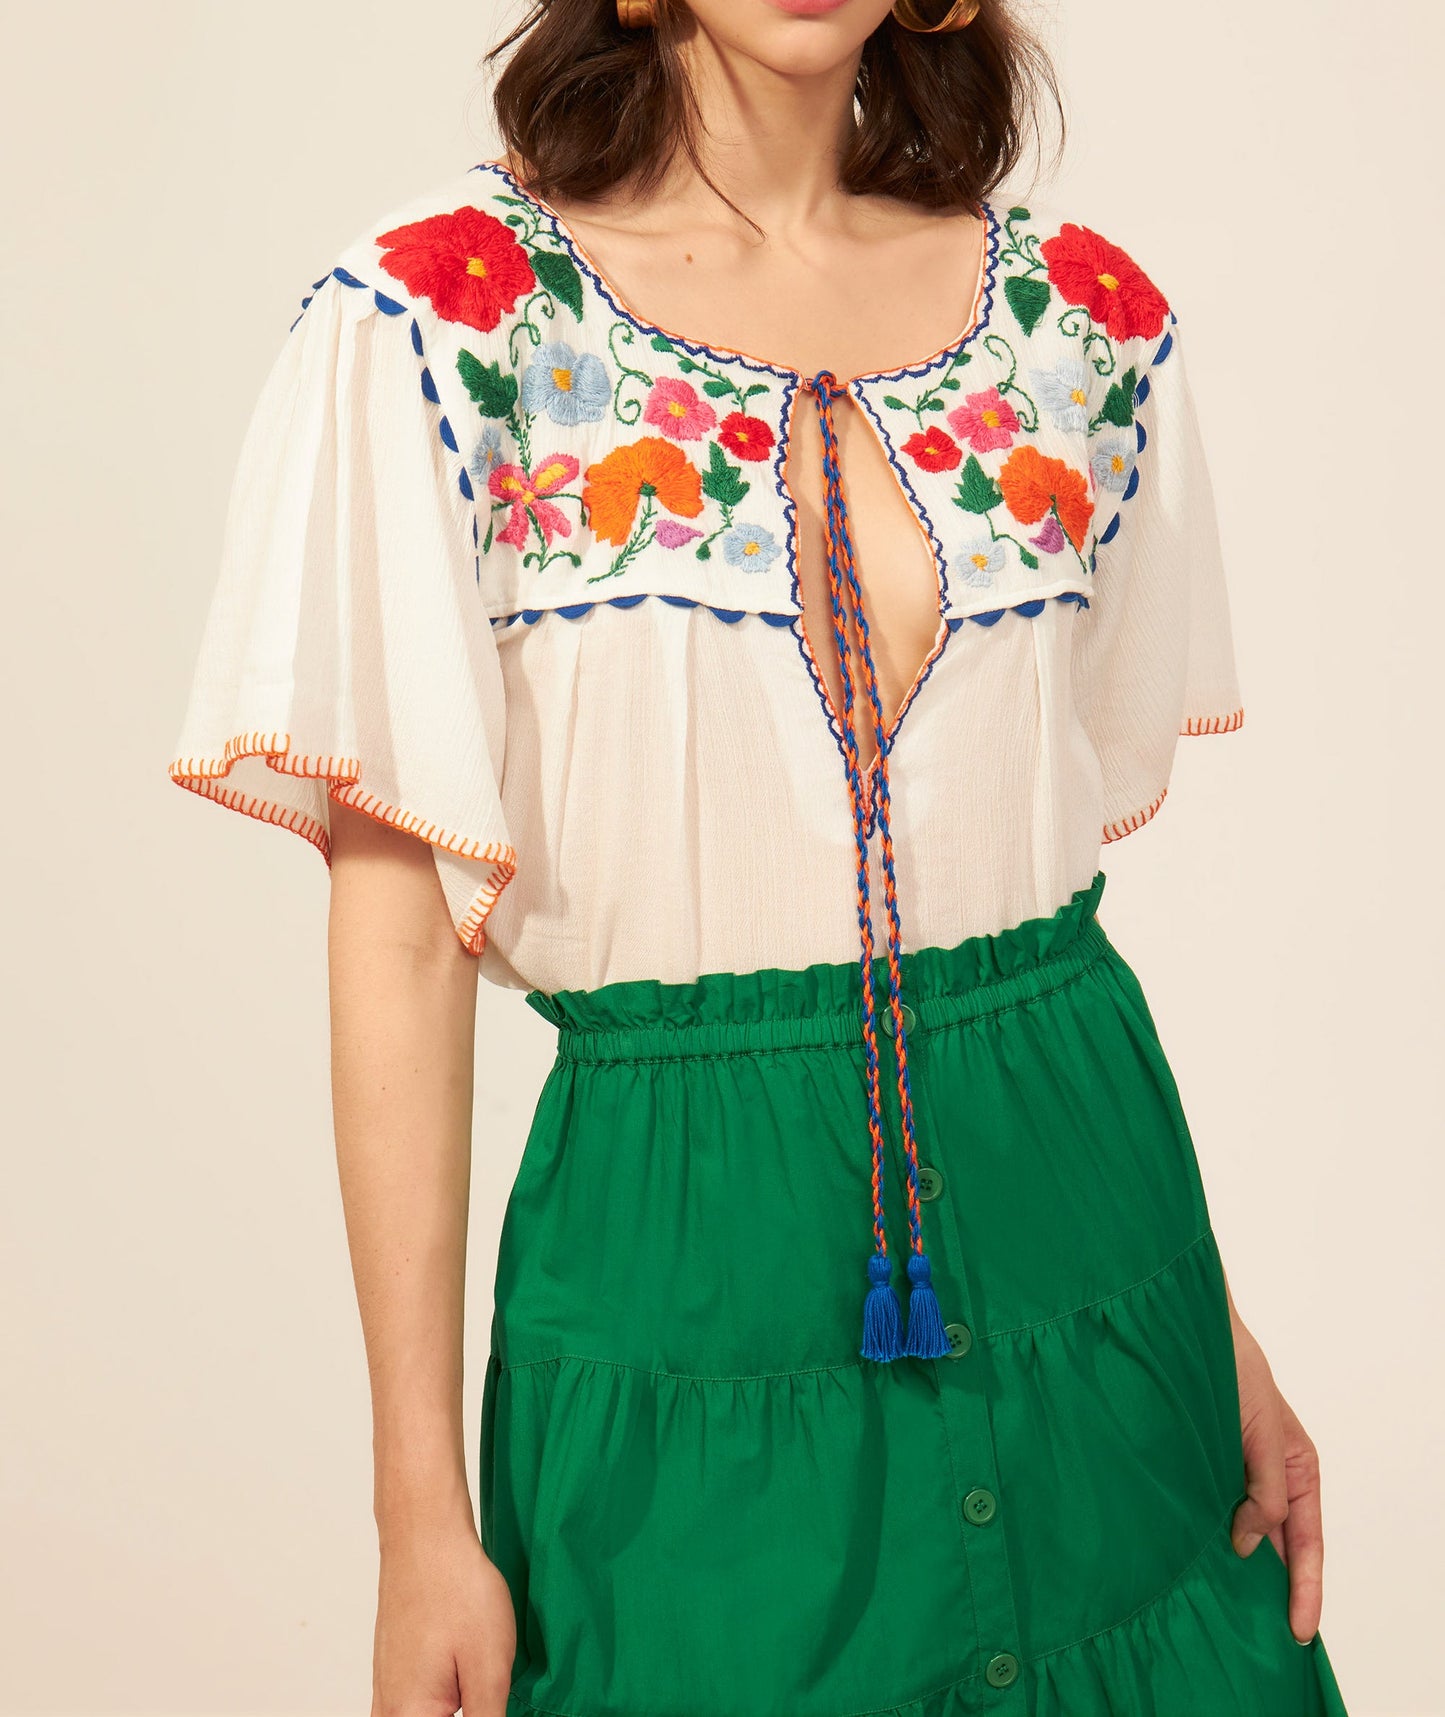 Clothilde embroidered top